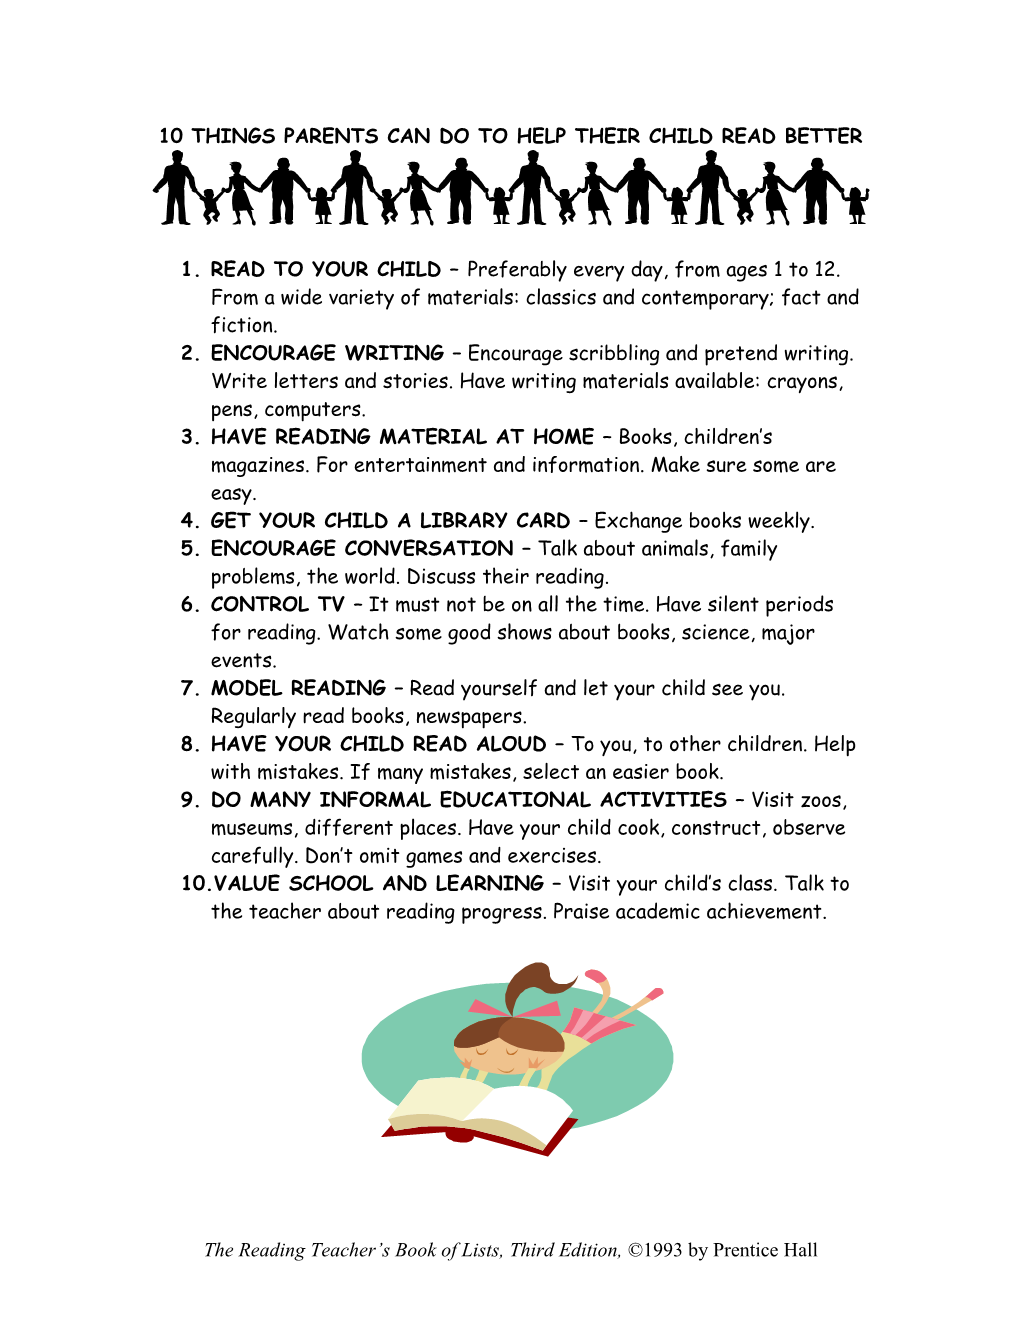 10 Things Parents Can Do to Help Their Child Read Better